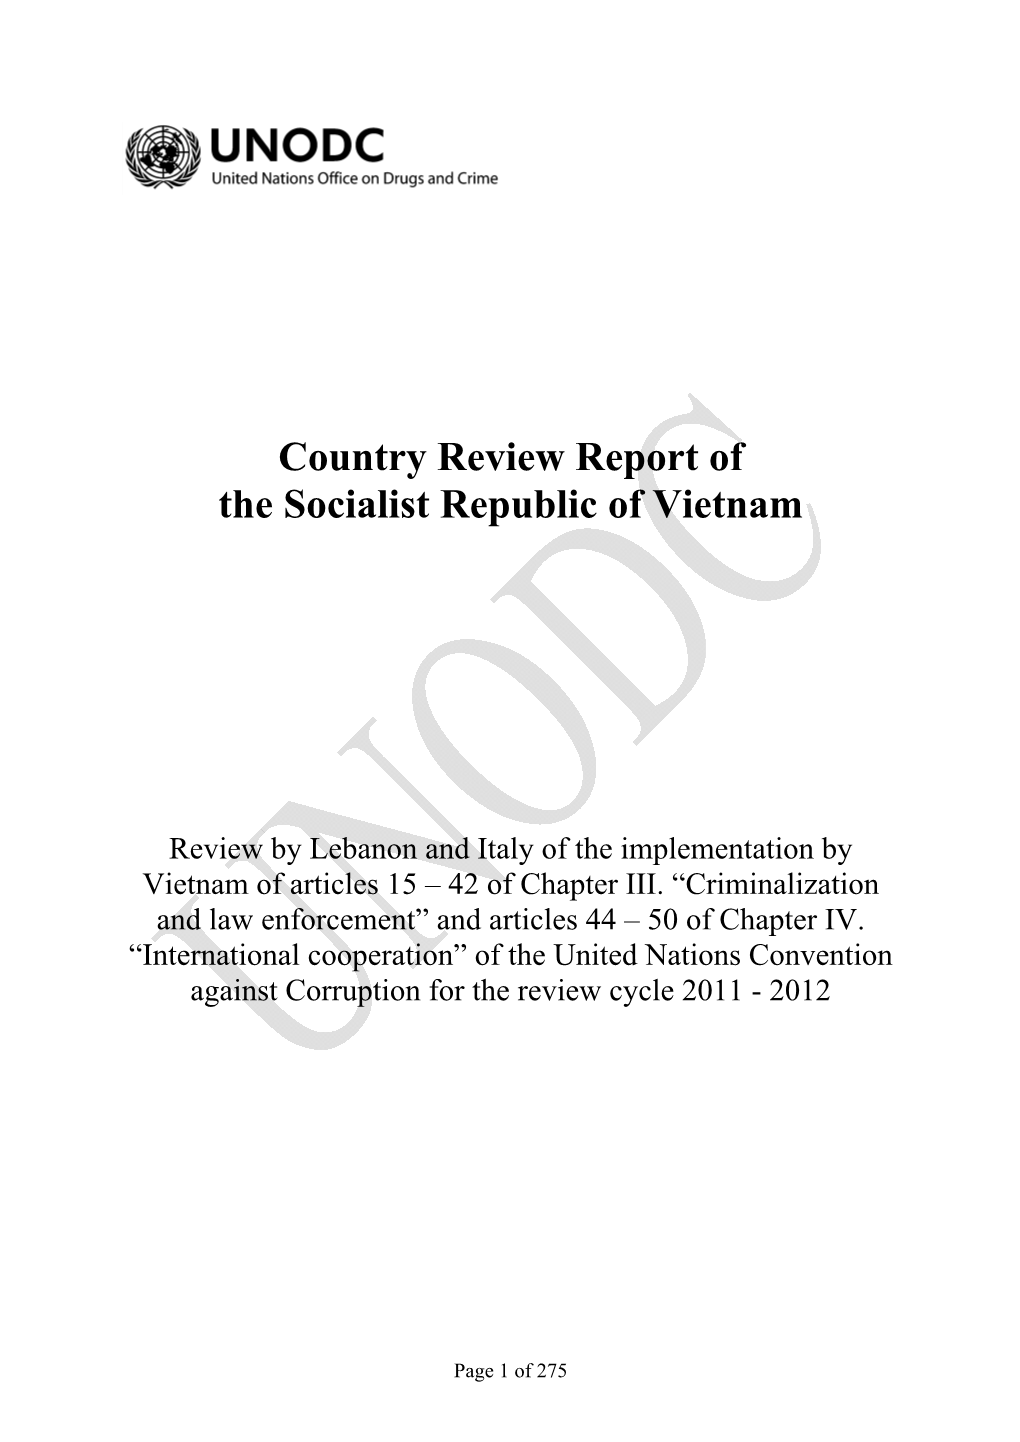 UNODC Country Review Report of the Socialist Republic of Vietnam 2011